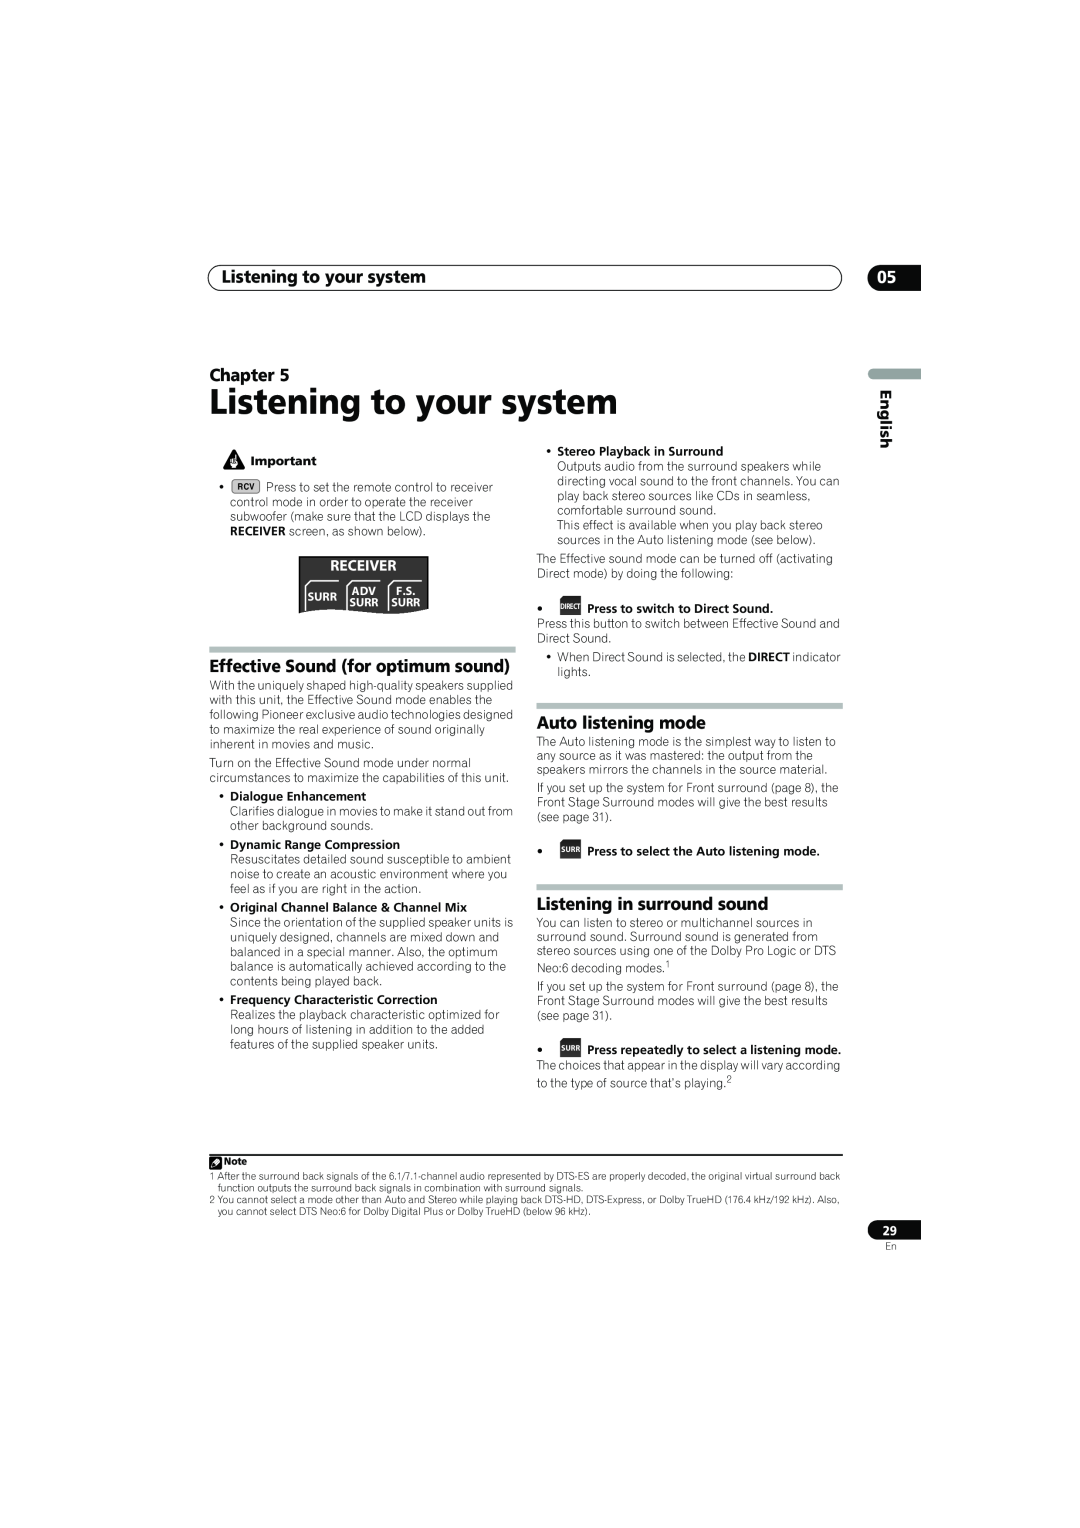 Pioneer SX-LX70SW Listening to your system Chapter, Effective Sound for optimum sound, Auto listening mode, English 